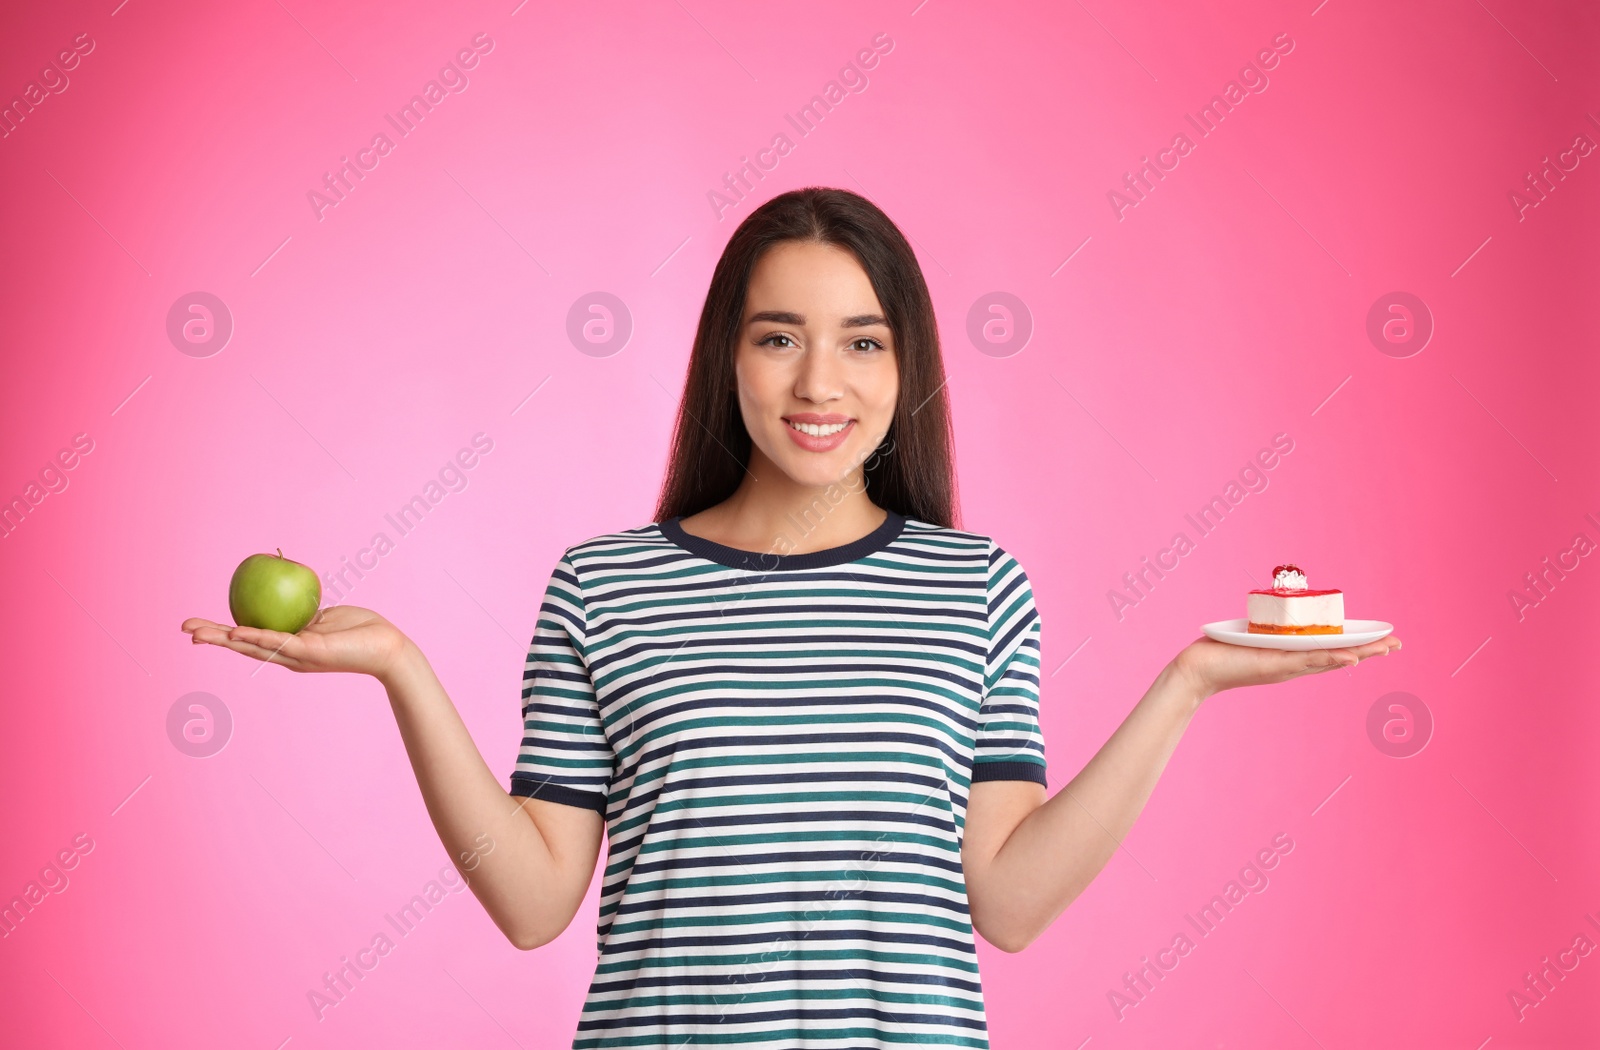 Photo of Concept of choice. Woman holding apple and cake on pink background